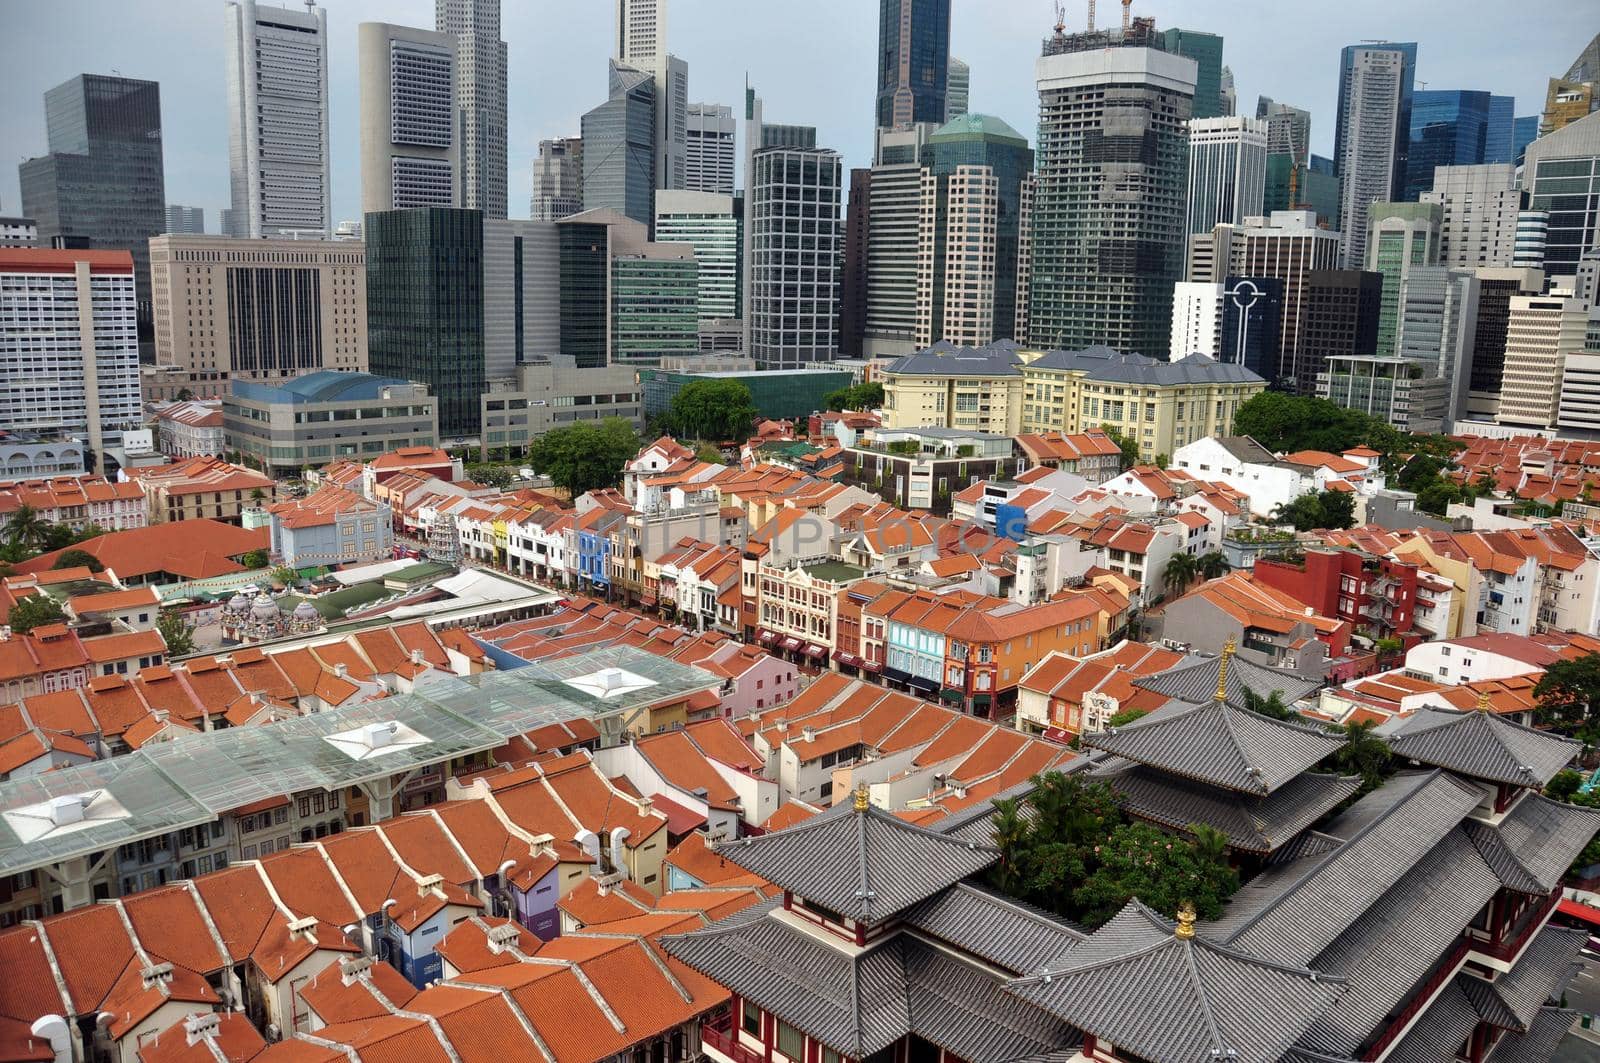 Chinatown in modern megapolis, View of orange rooftops of Chinatown with highrise buildings of modern futuristic city, Singapore. by DogoraSun